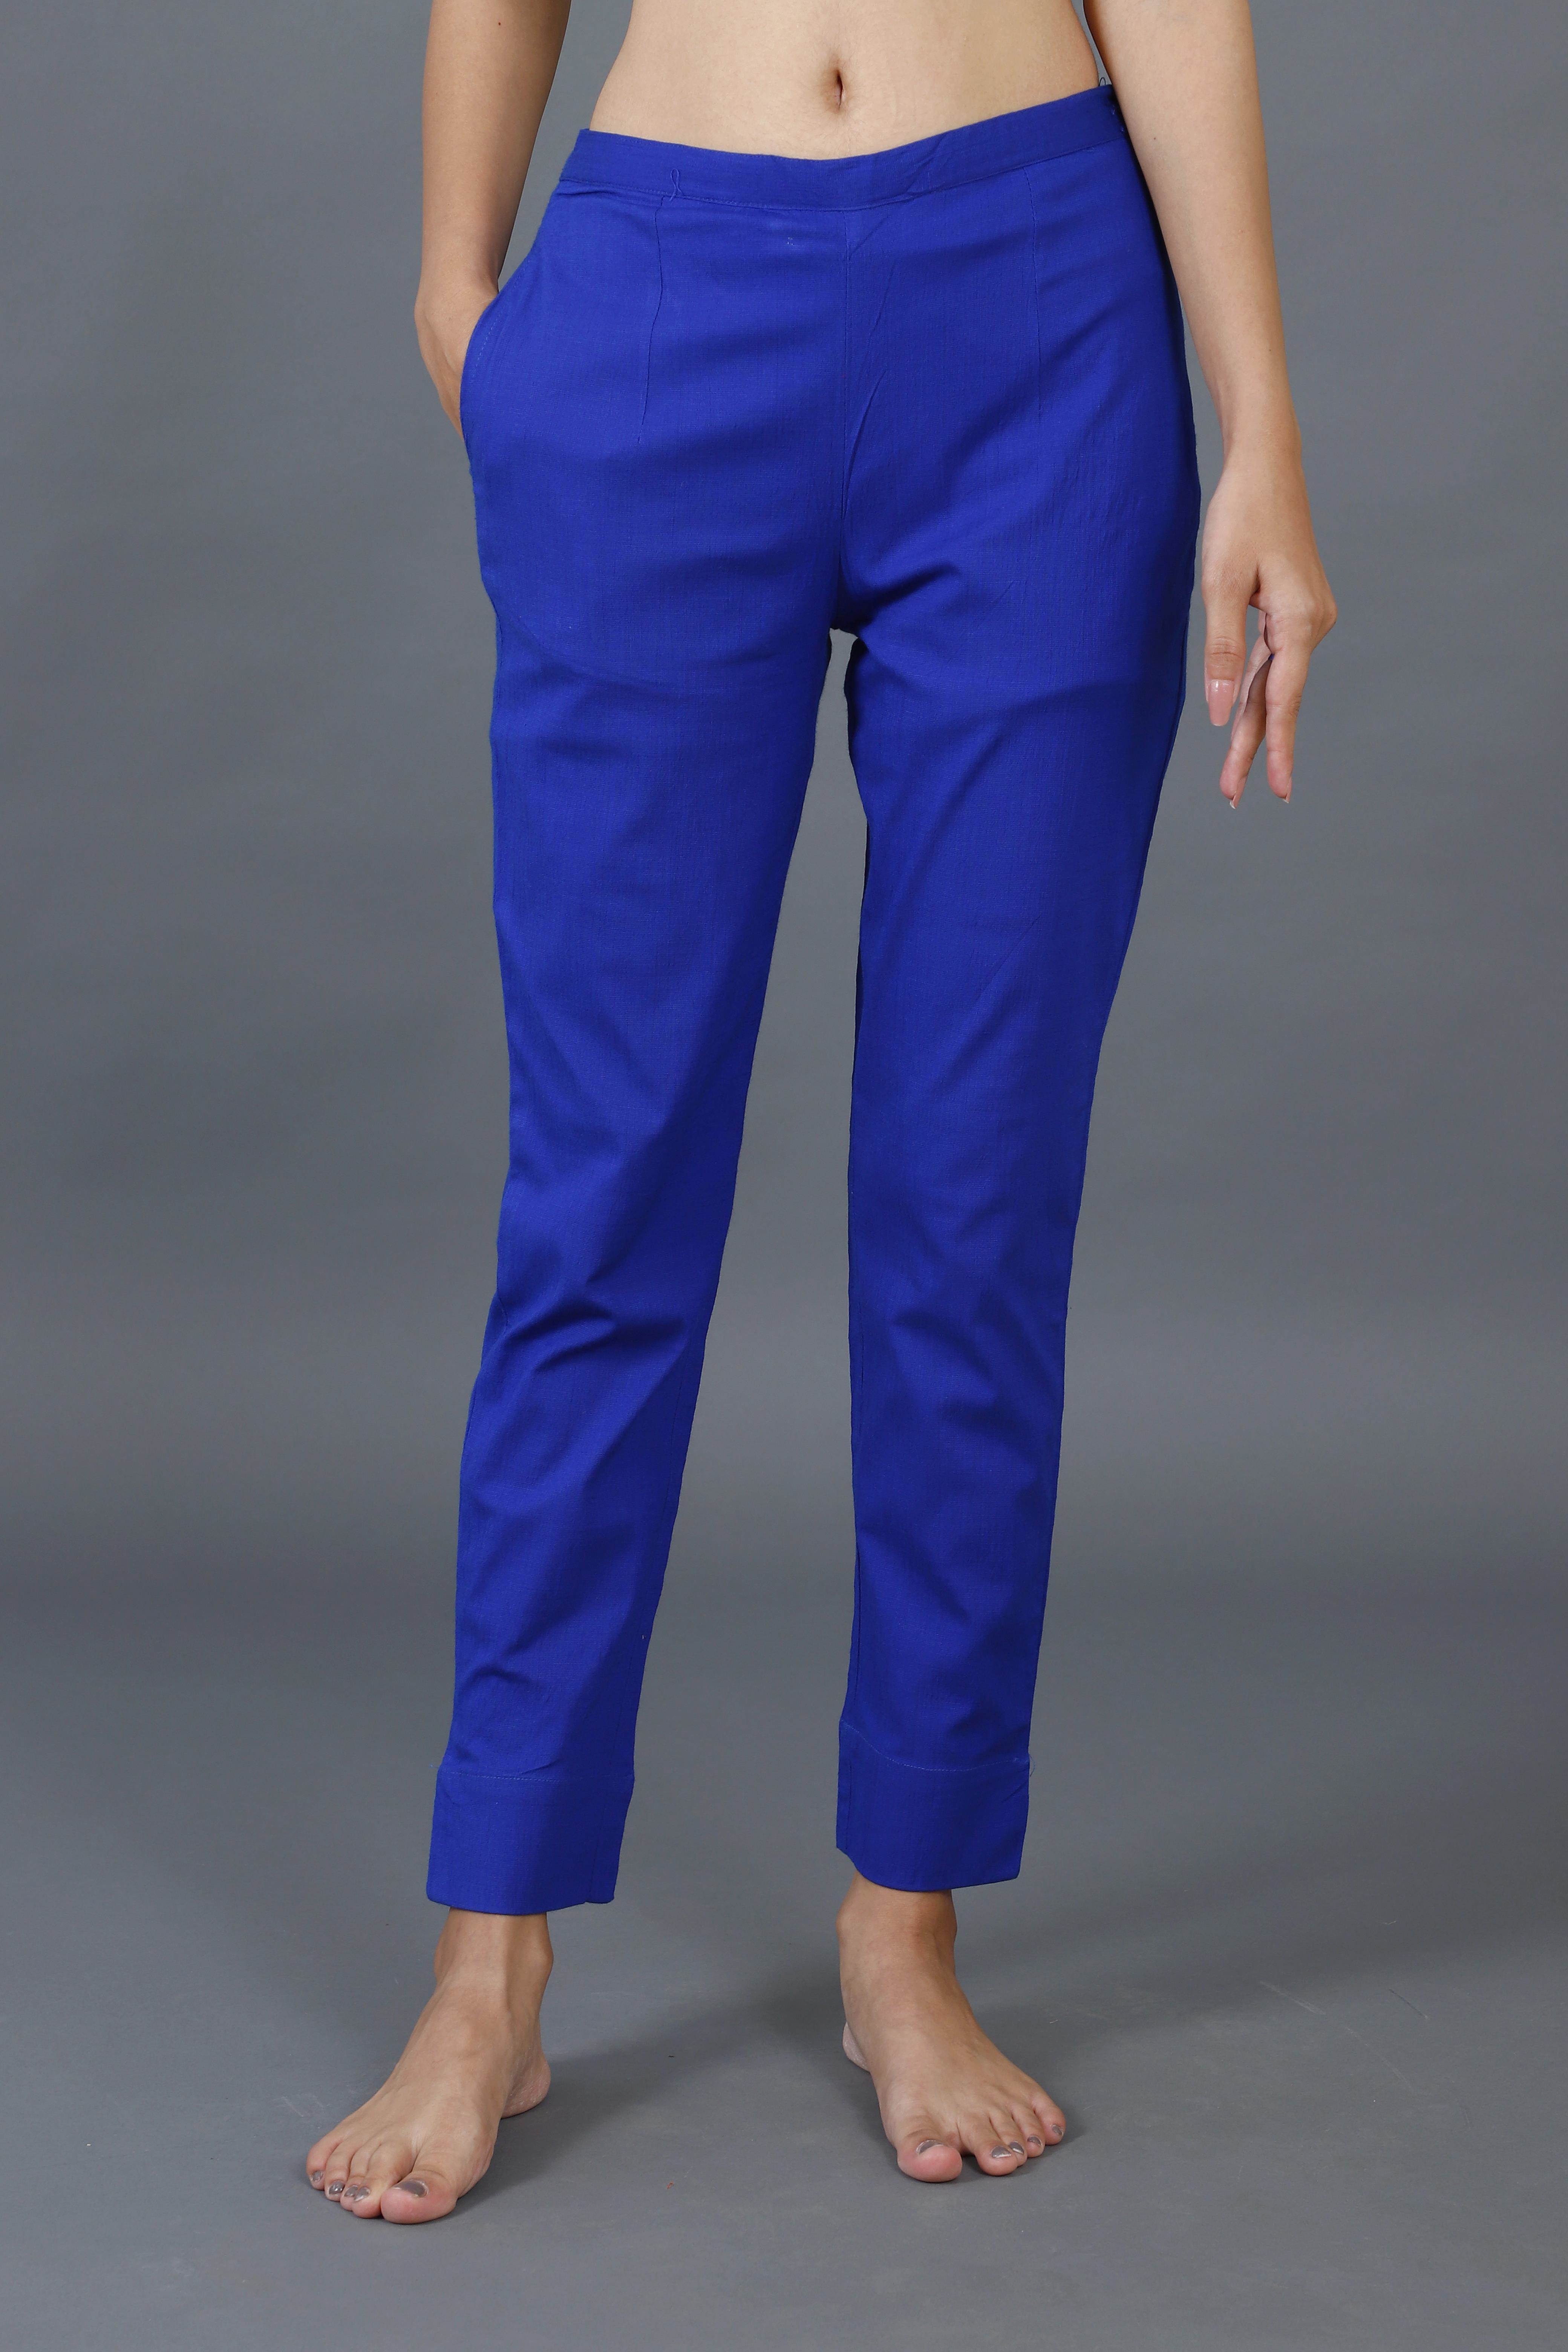 Pieces cord high waisted wide leg trousers co-ord in royal blue | ASOS